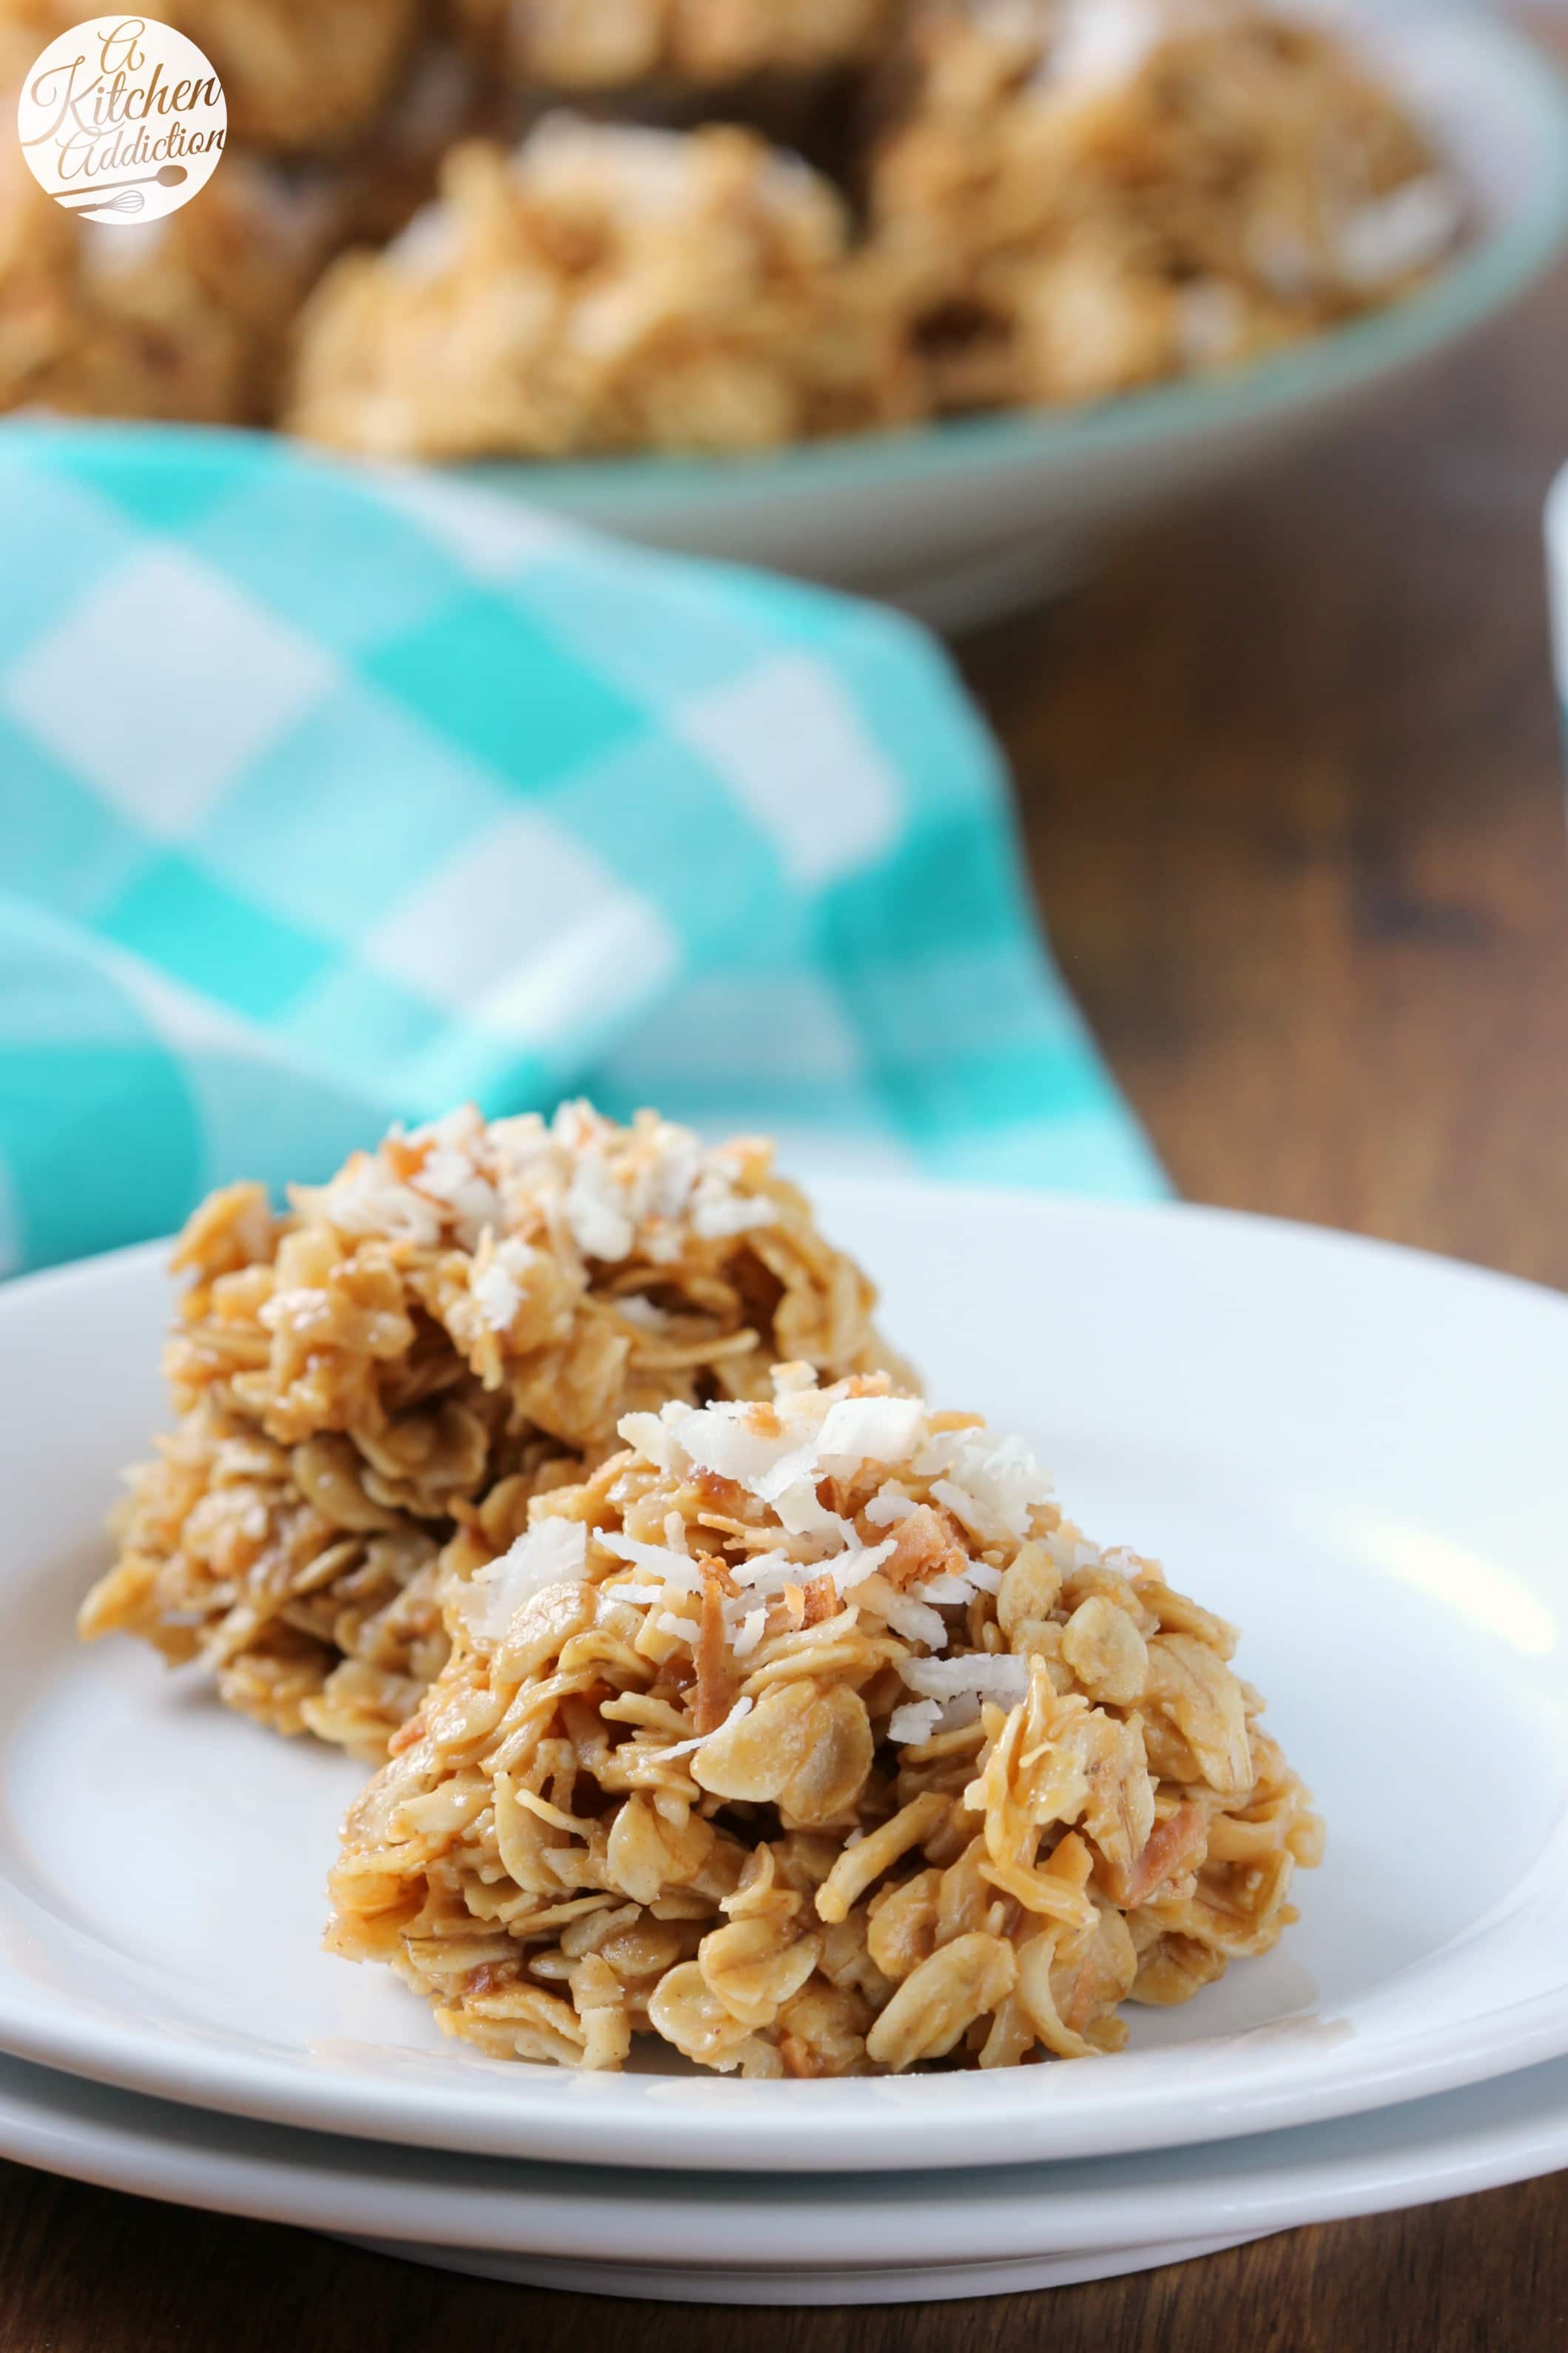 Toasted Coconut Peanut Butter No Bake Cookies Recipe from A Kitchen Addiction